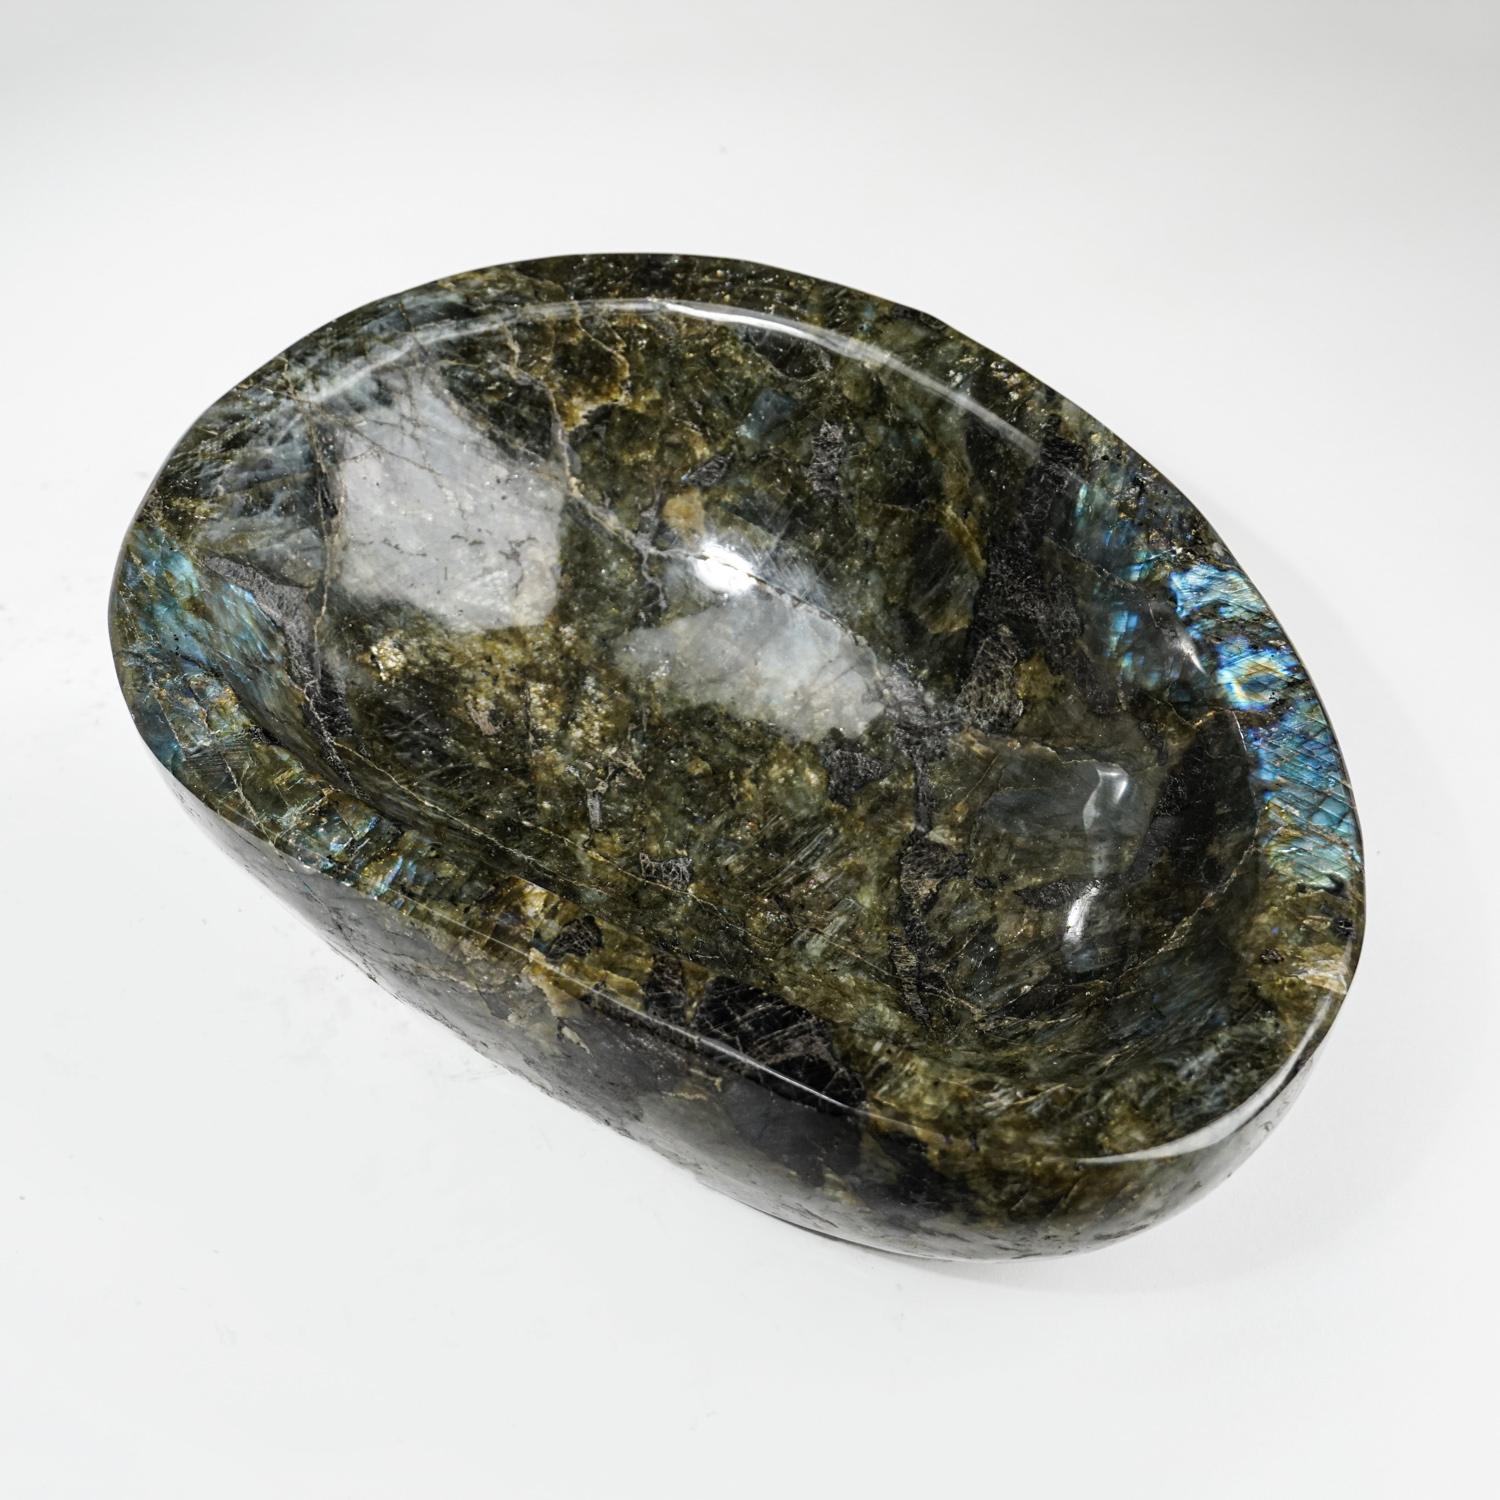 Other Genuine Polished Labradorite Large Bowl (19.6 lbs) For Sale